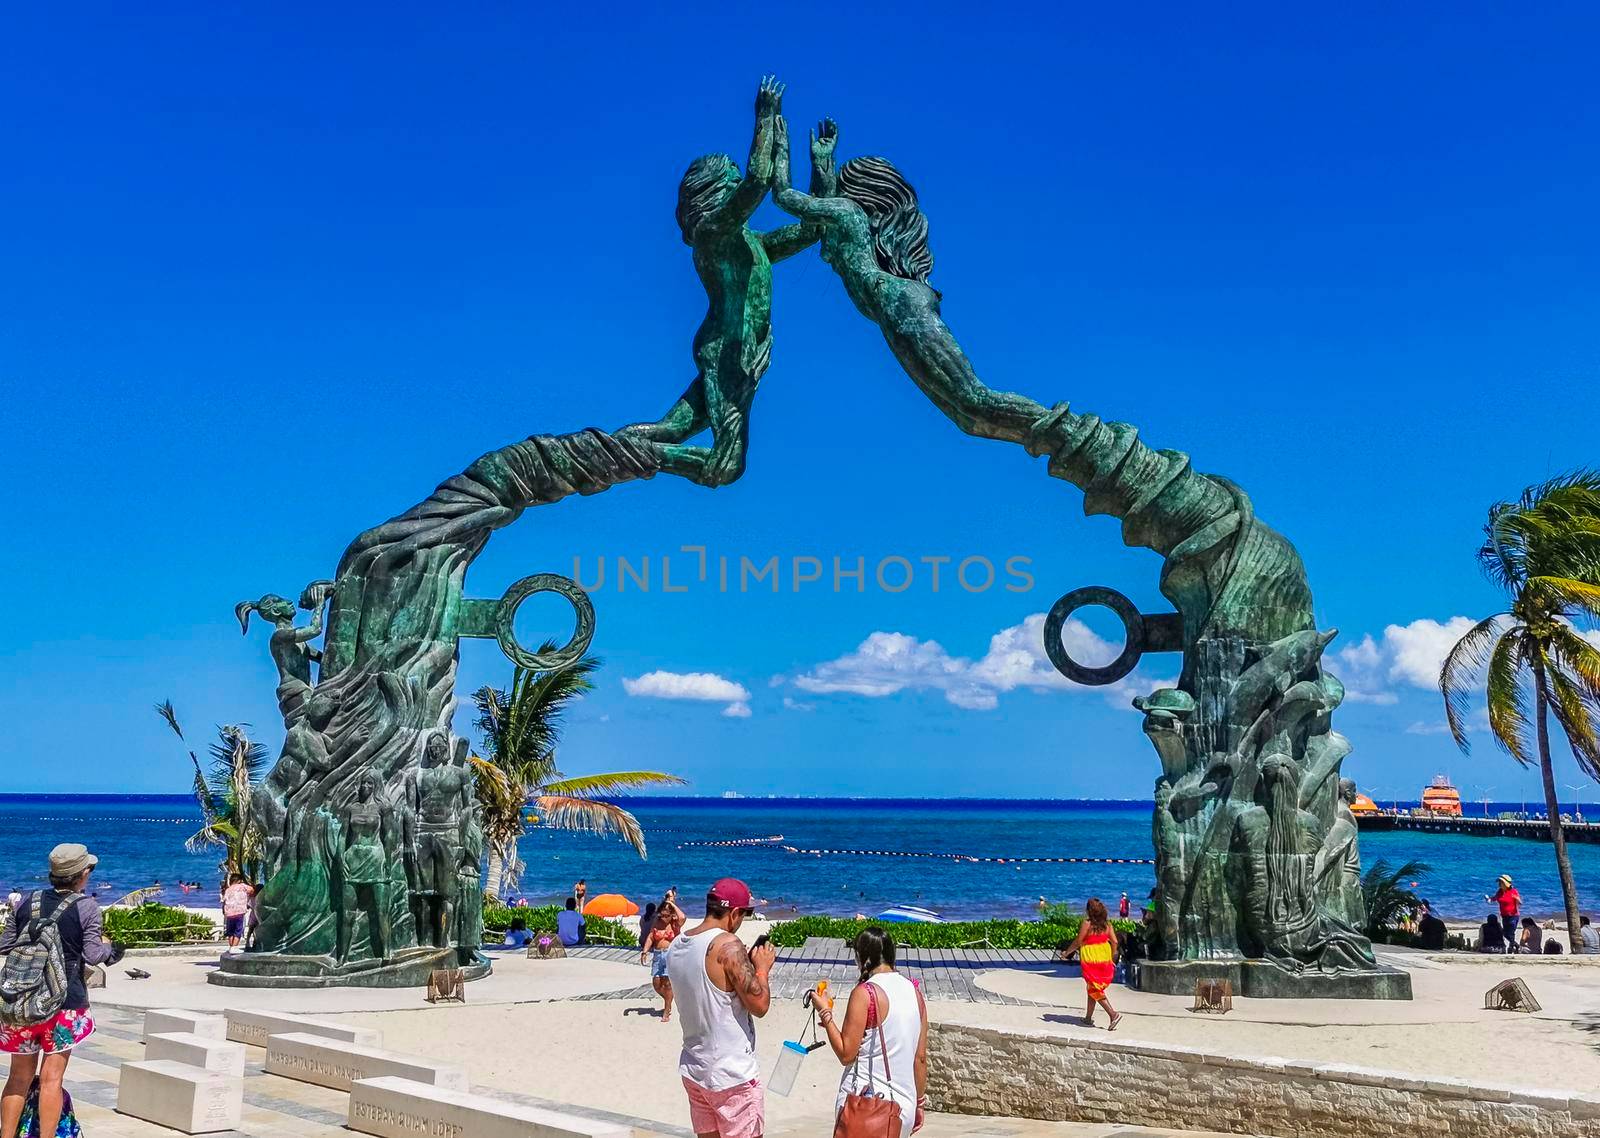 Playa del Carmen Mexico 14. May 2022 The ancient architecture of the Portal Maya in the Fundadores park with blue sky and turquoise seascape and beach panorama in Playa del Carmen Quintana Roo Mexico.